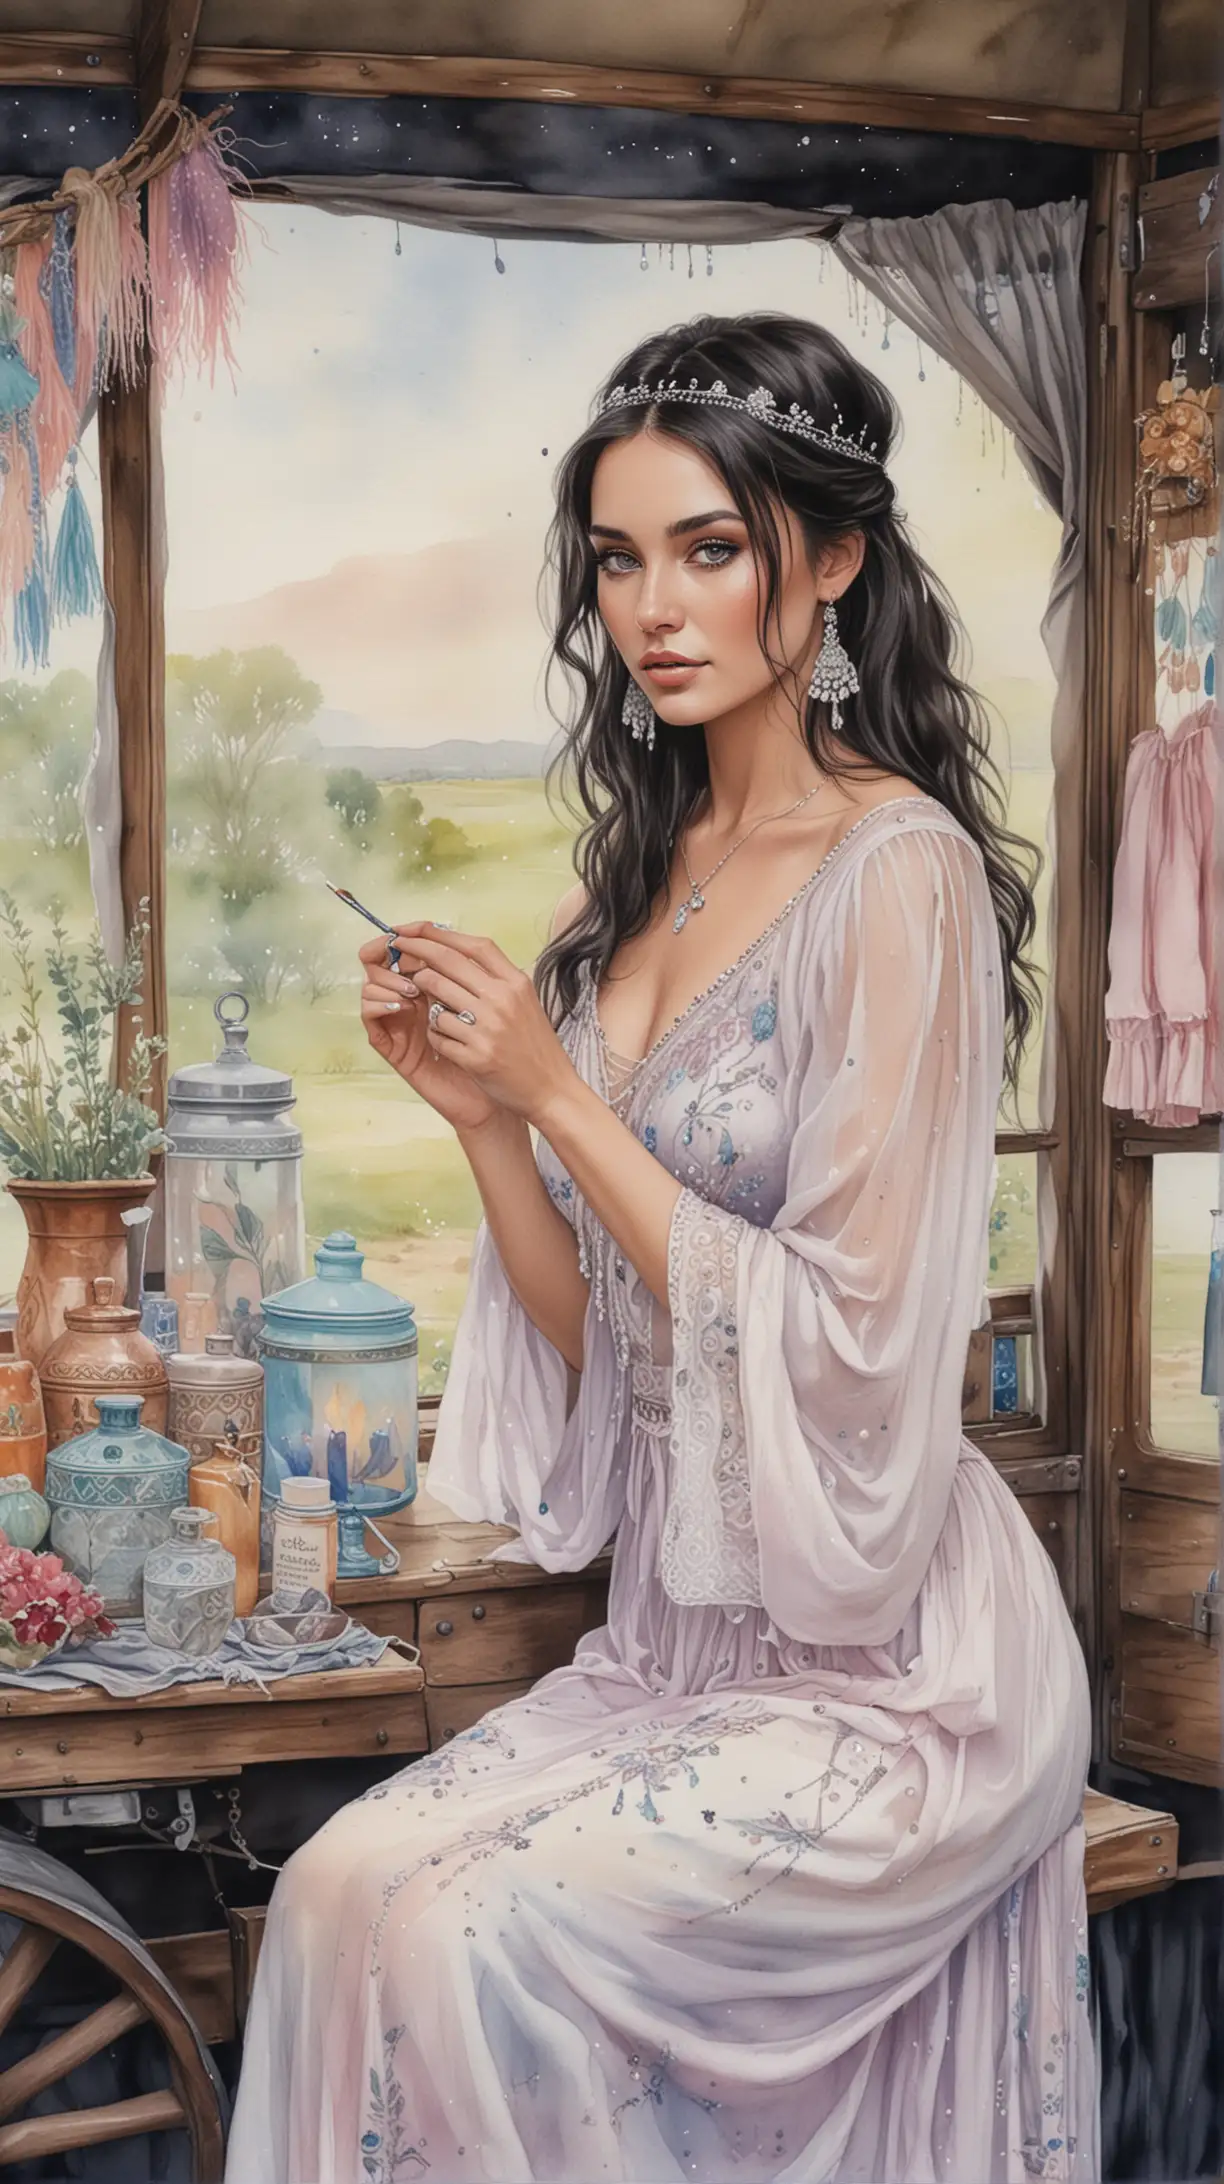 Gypsy Wagon Crystal and Incense Shop on a Pastel Watercolor Background